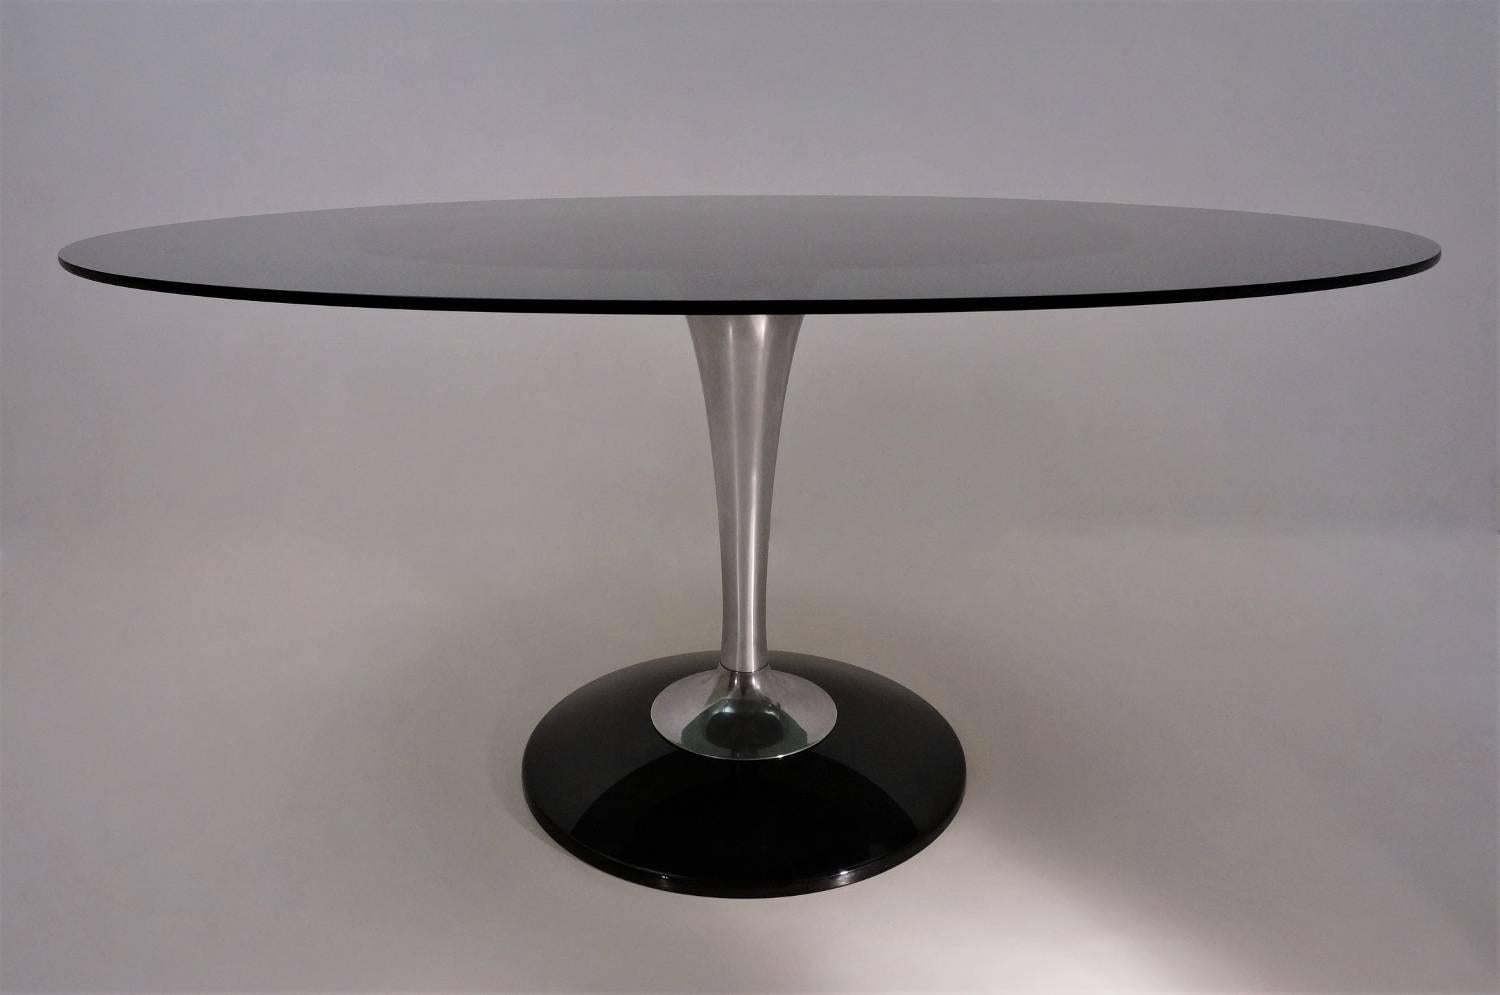 Chromcraft table, oval smoked glass top on an aluminium & acrylic pedestal base, 1970s circa, American.
This dining table has been gently cleaned while respecting the vintage patina and is ready to use.

Part of the Marquise dining set this table